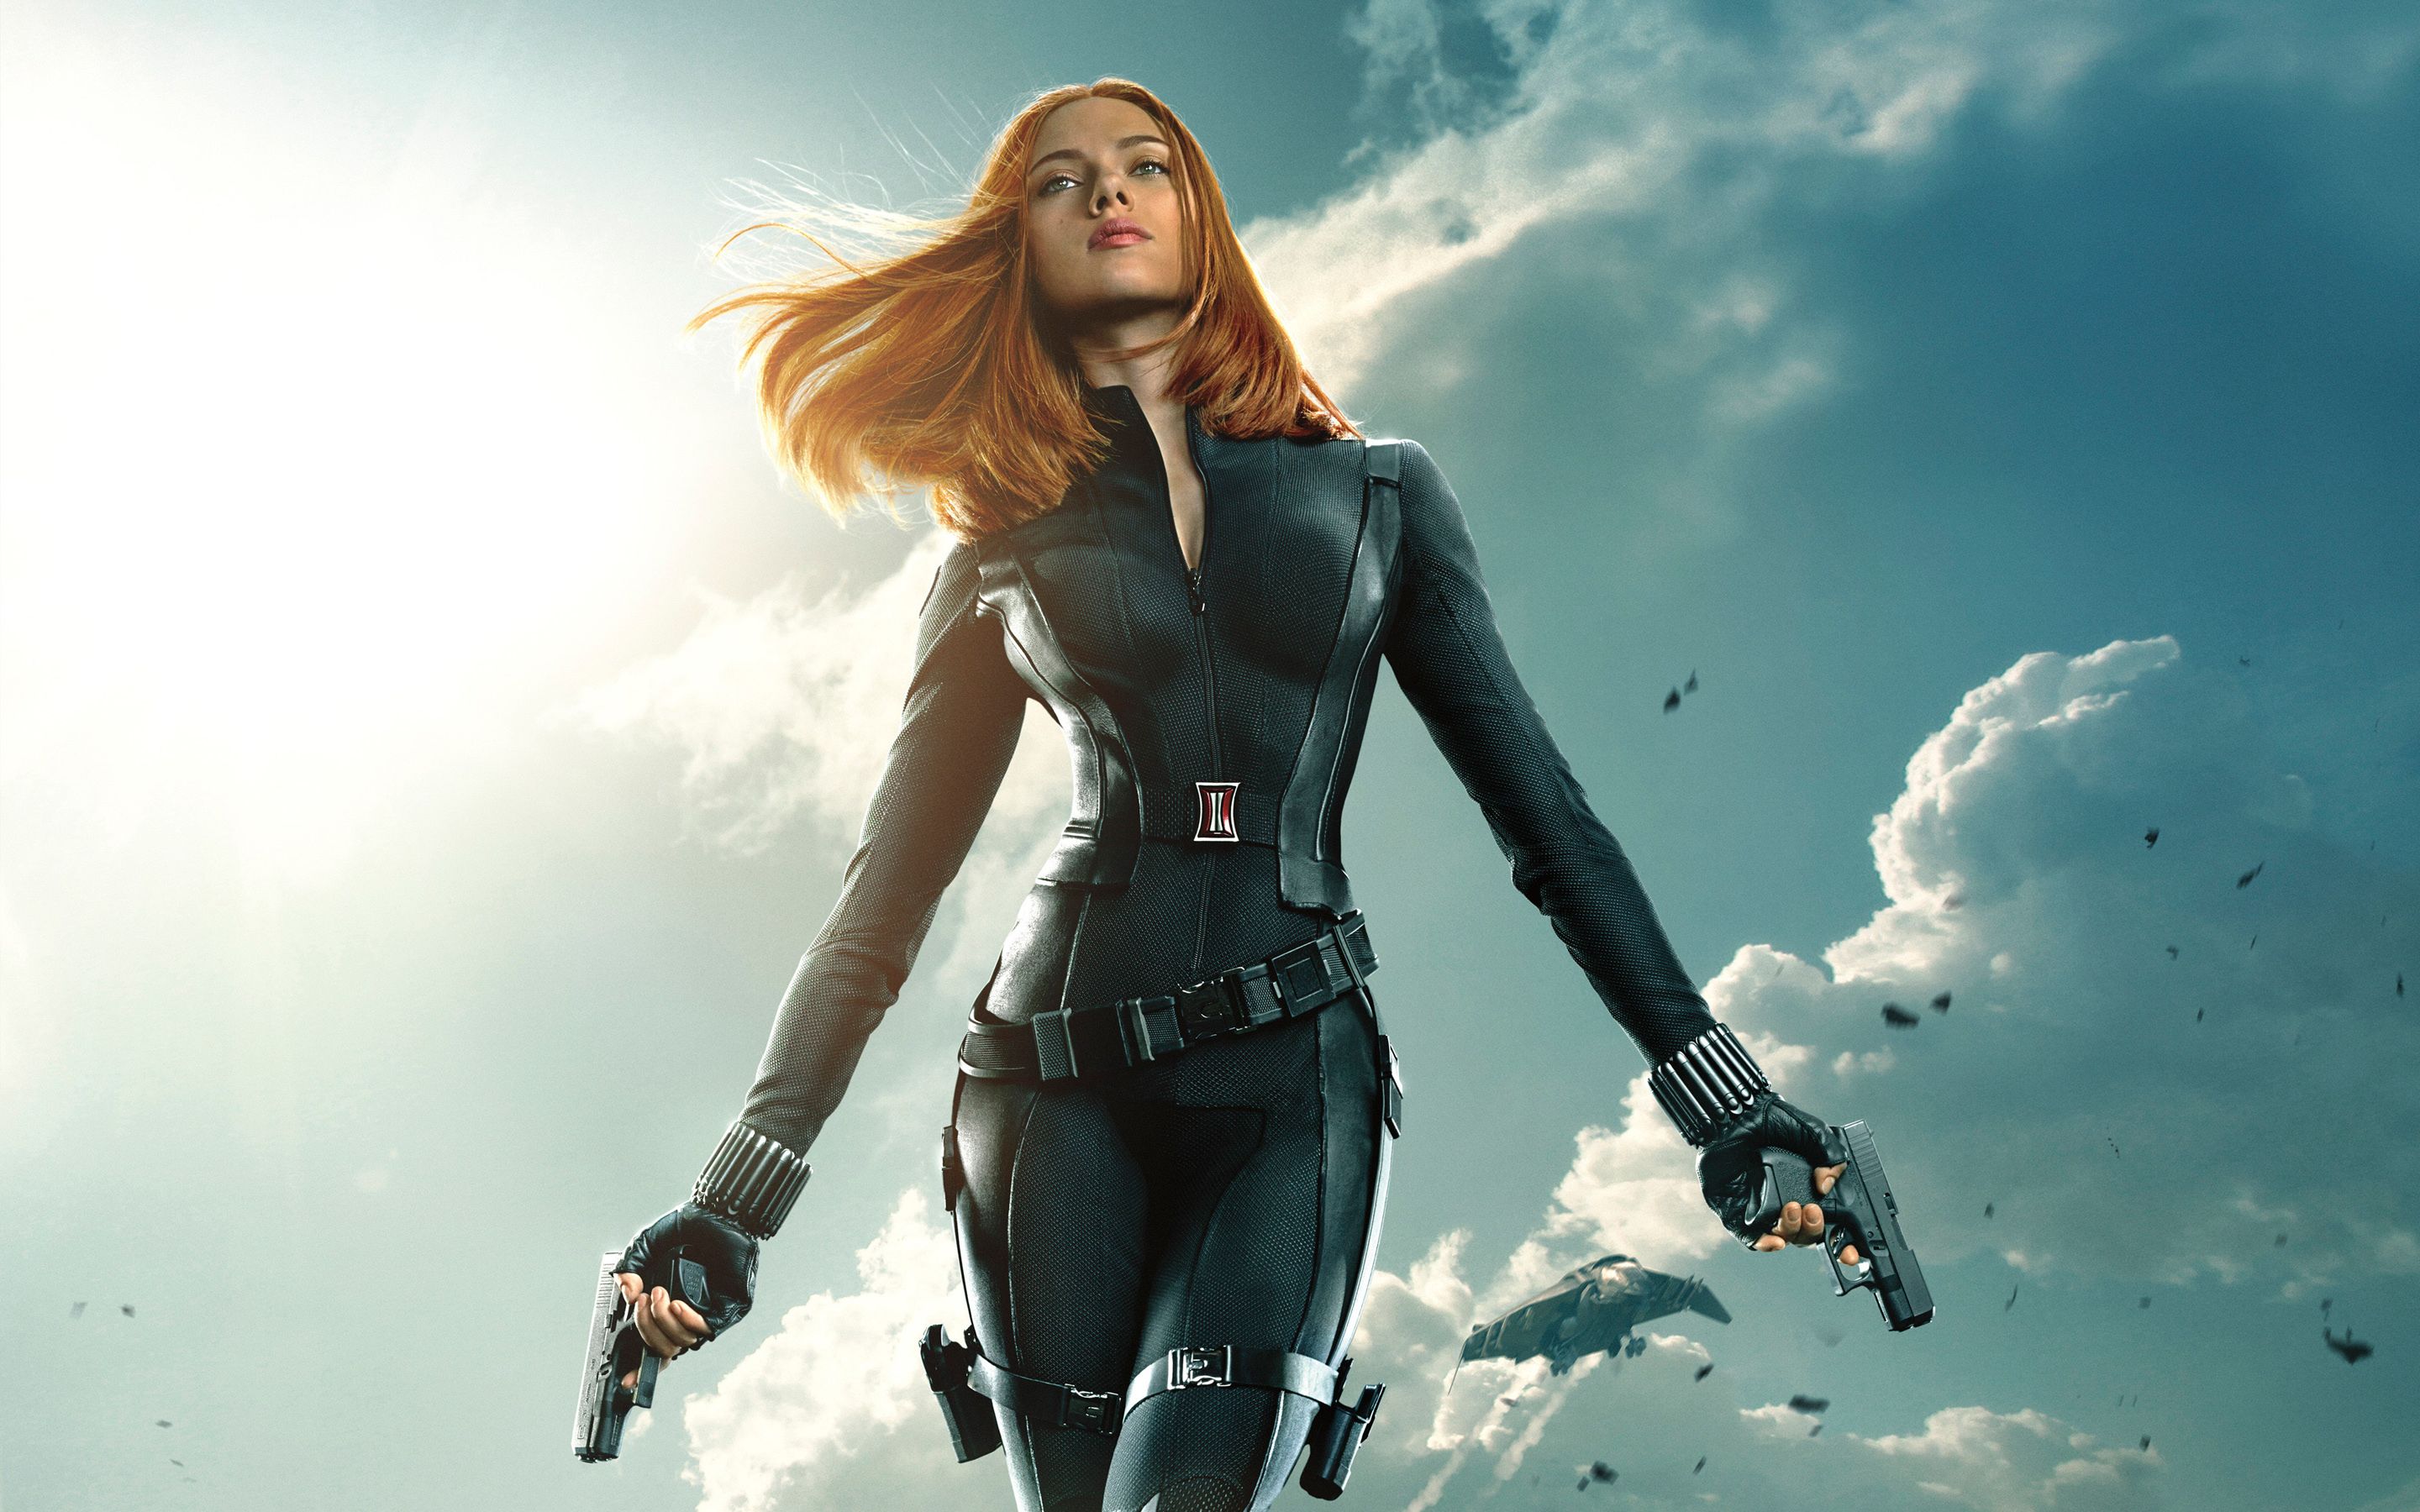 Marvel Legend Stan Lee Hints That A BLACK WIDOW Solo Movie Is Going To Happen